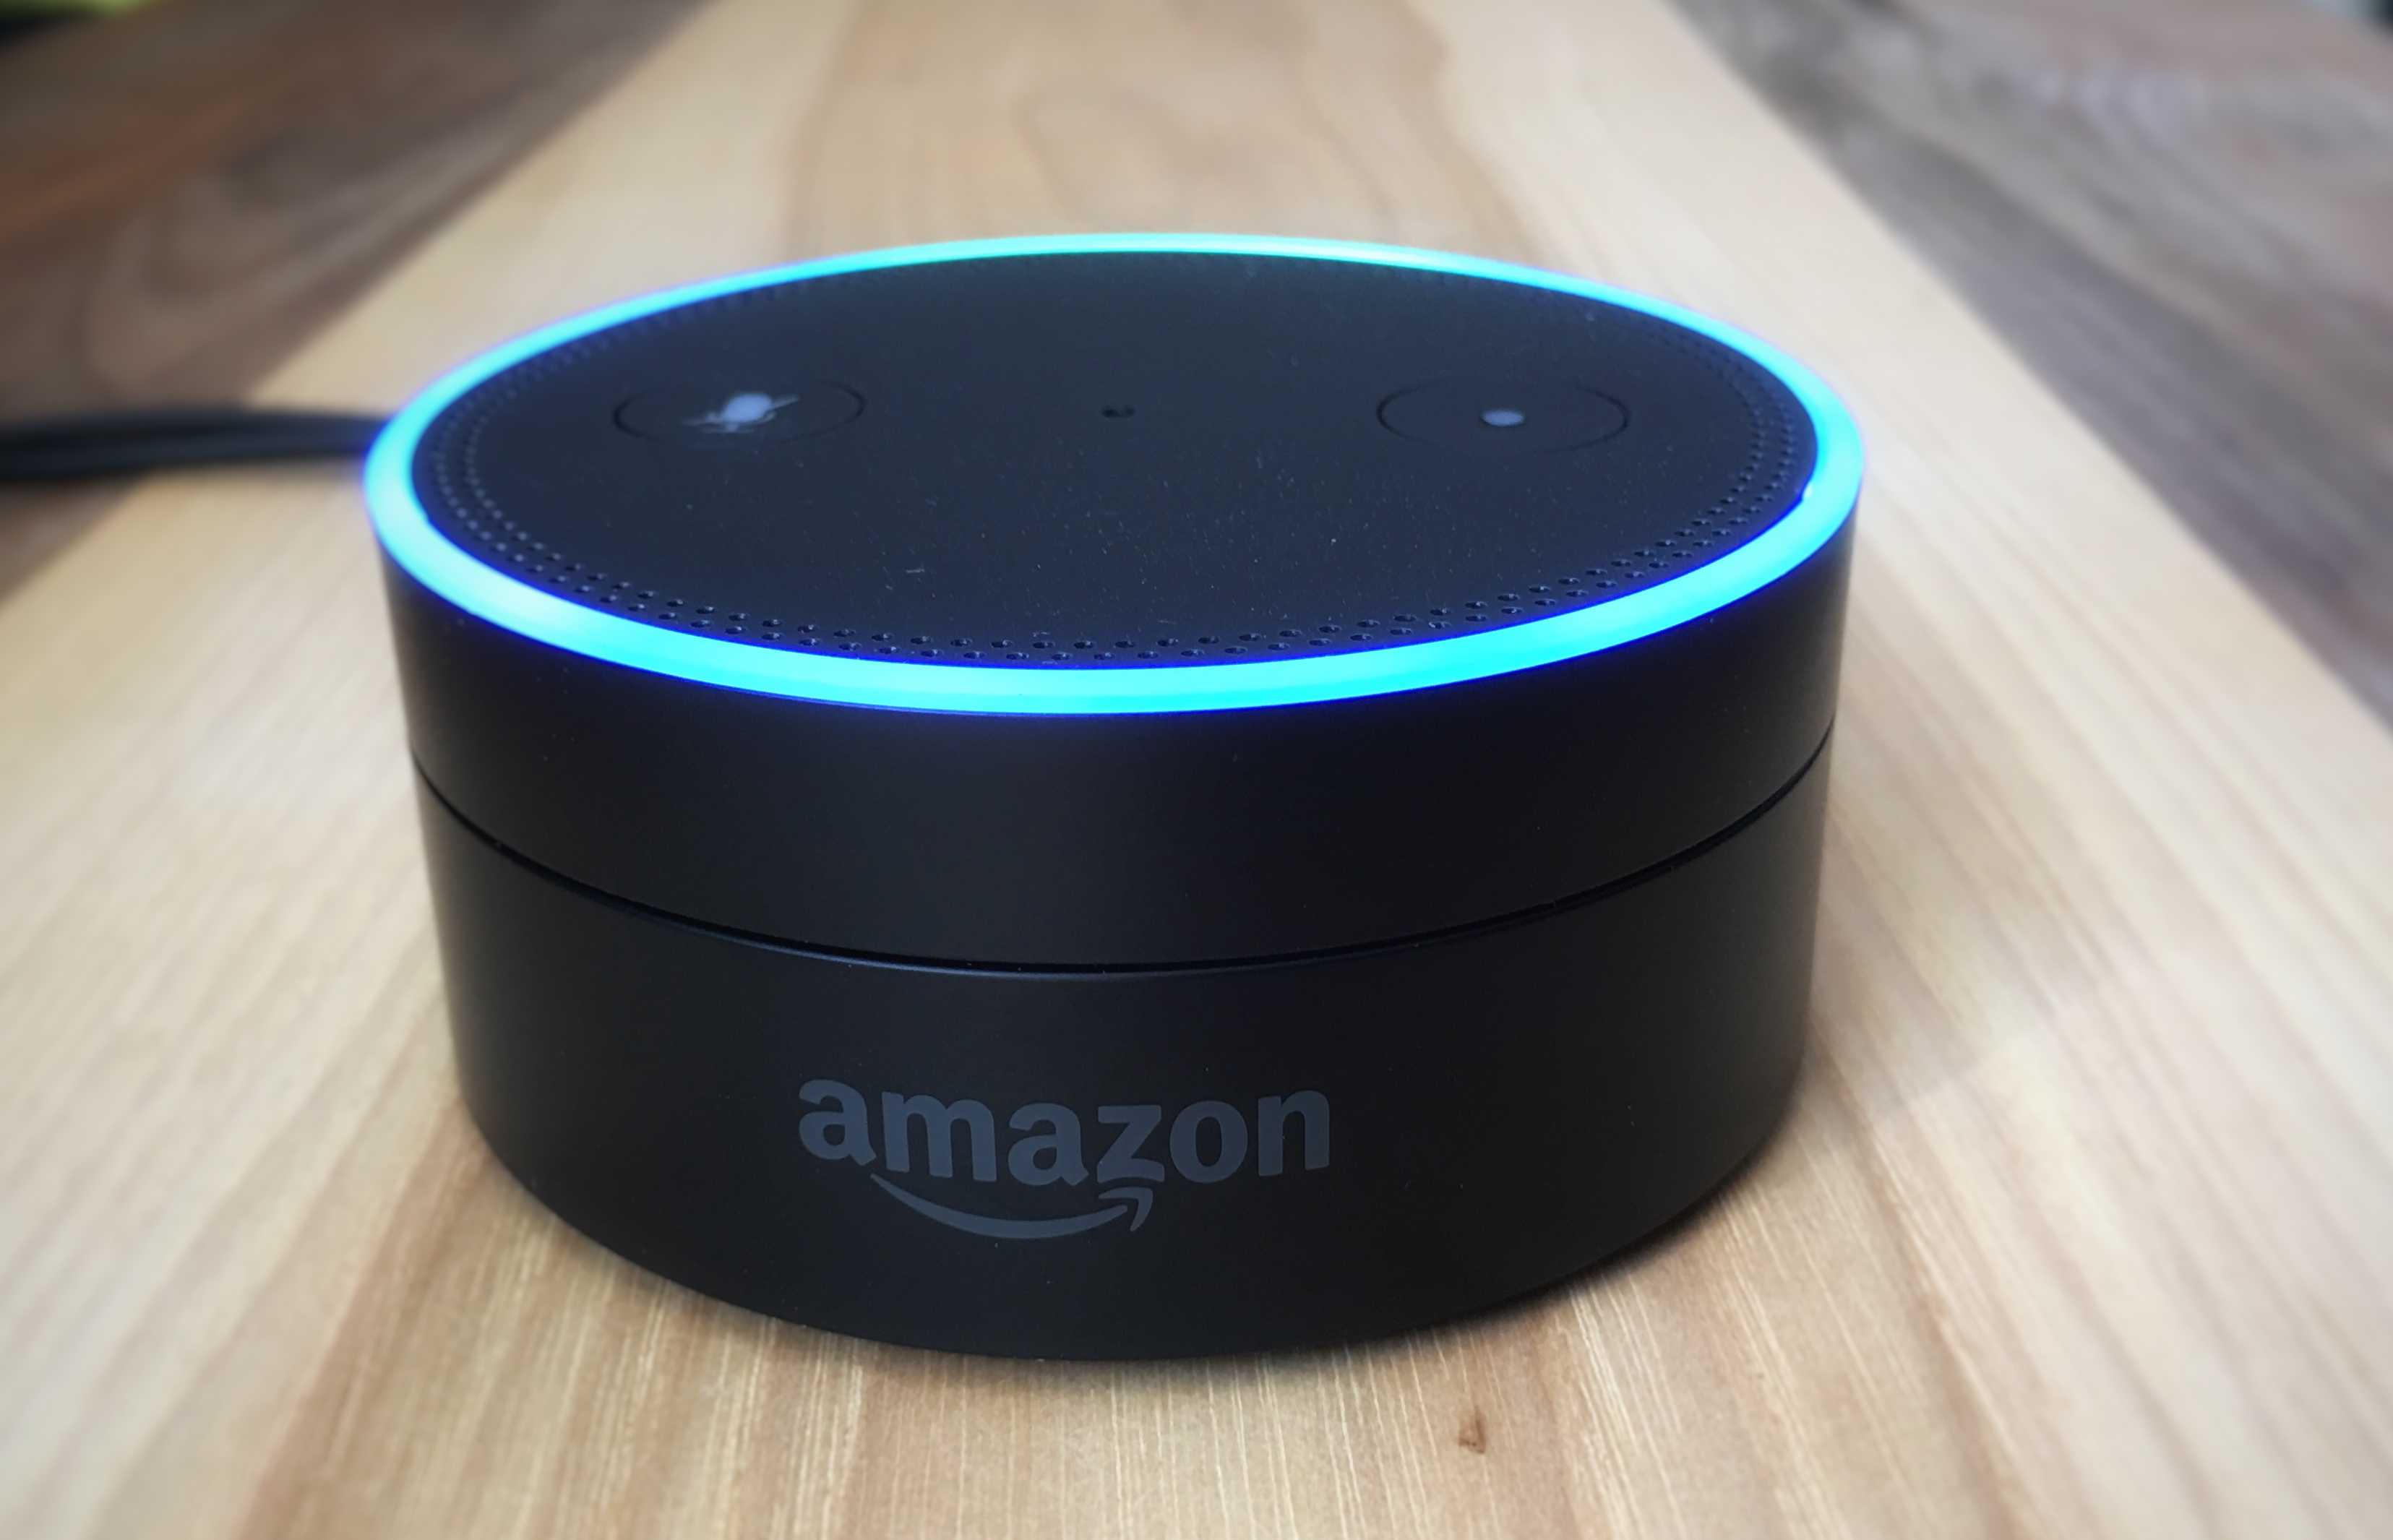 Connect the Amazon Echo Dot to your existing speaker system, and you bingo! -- your speakers just got smarts.